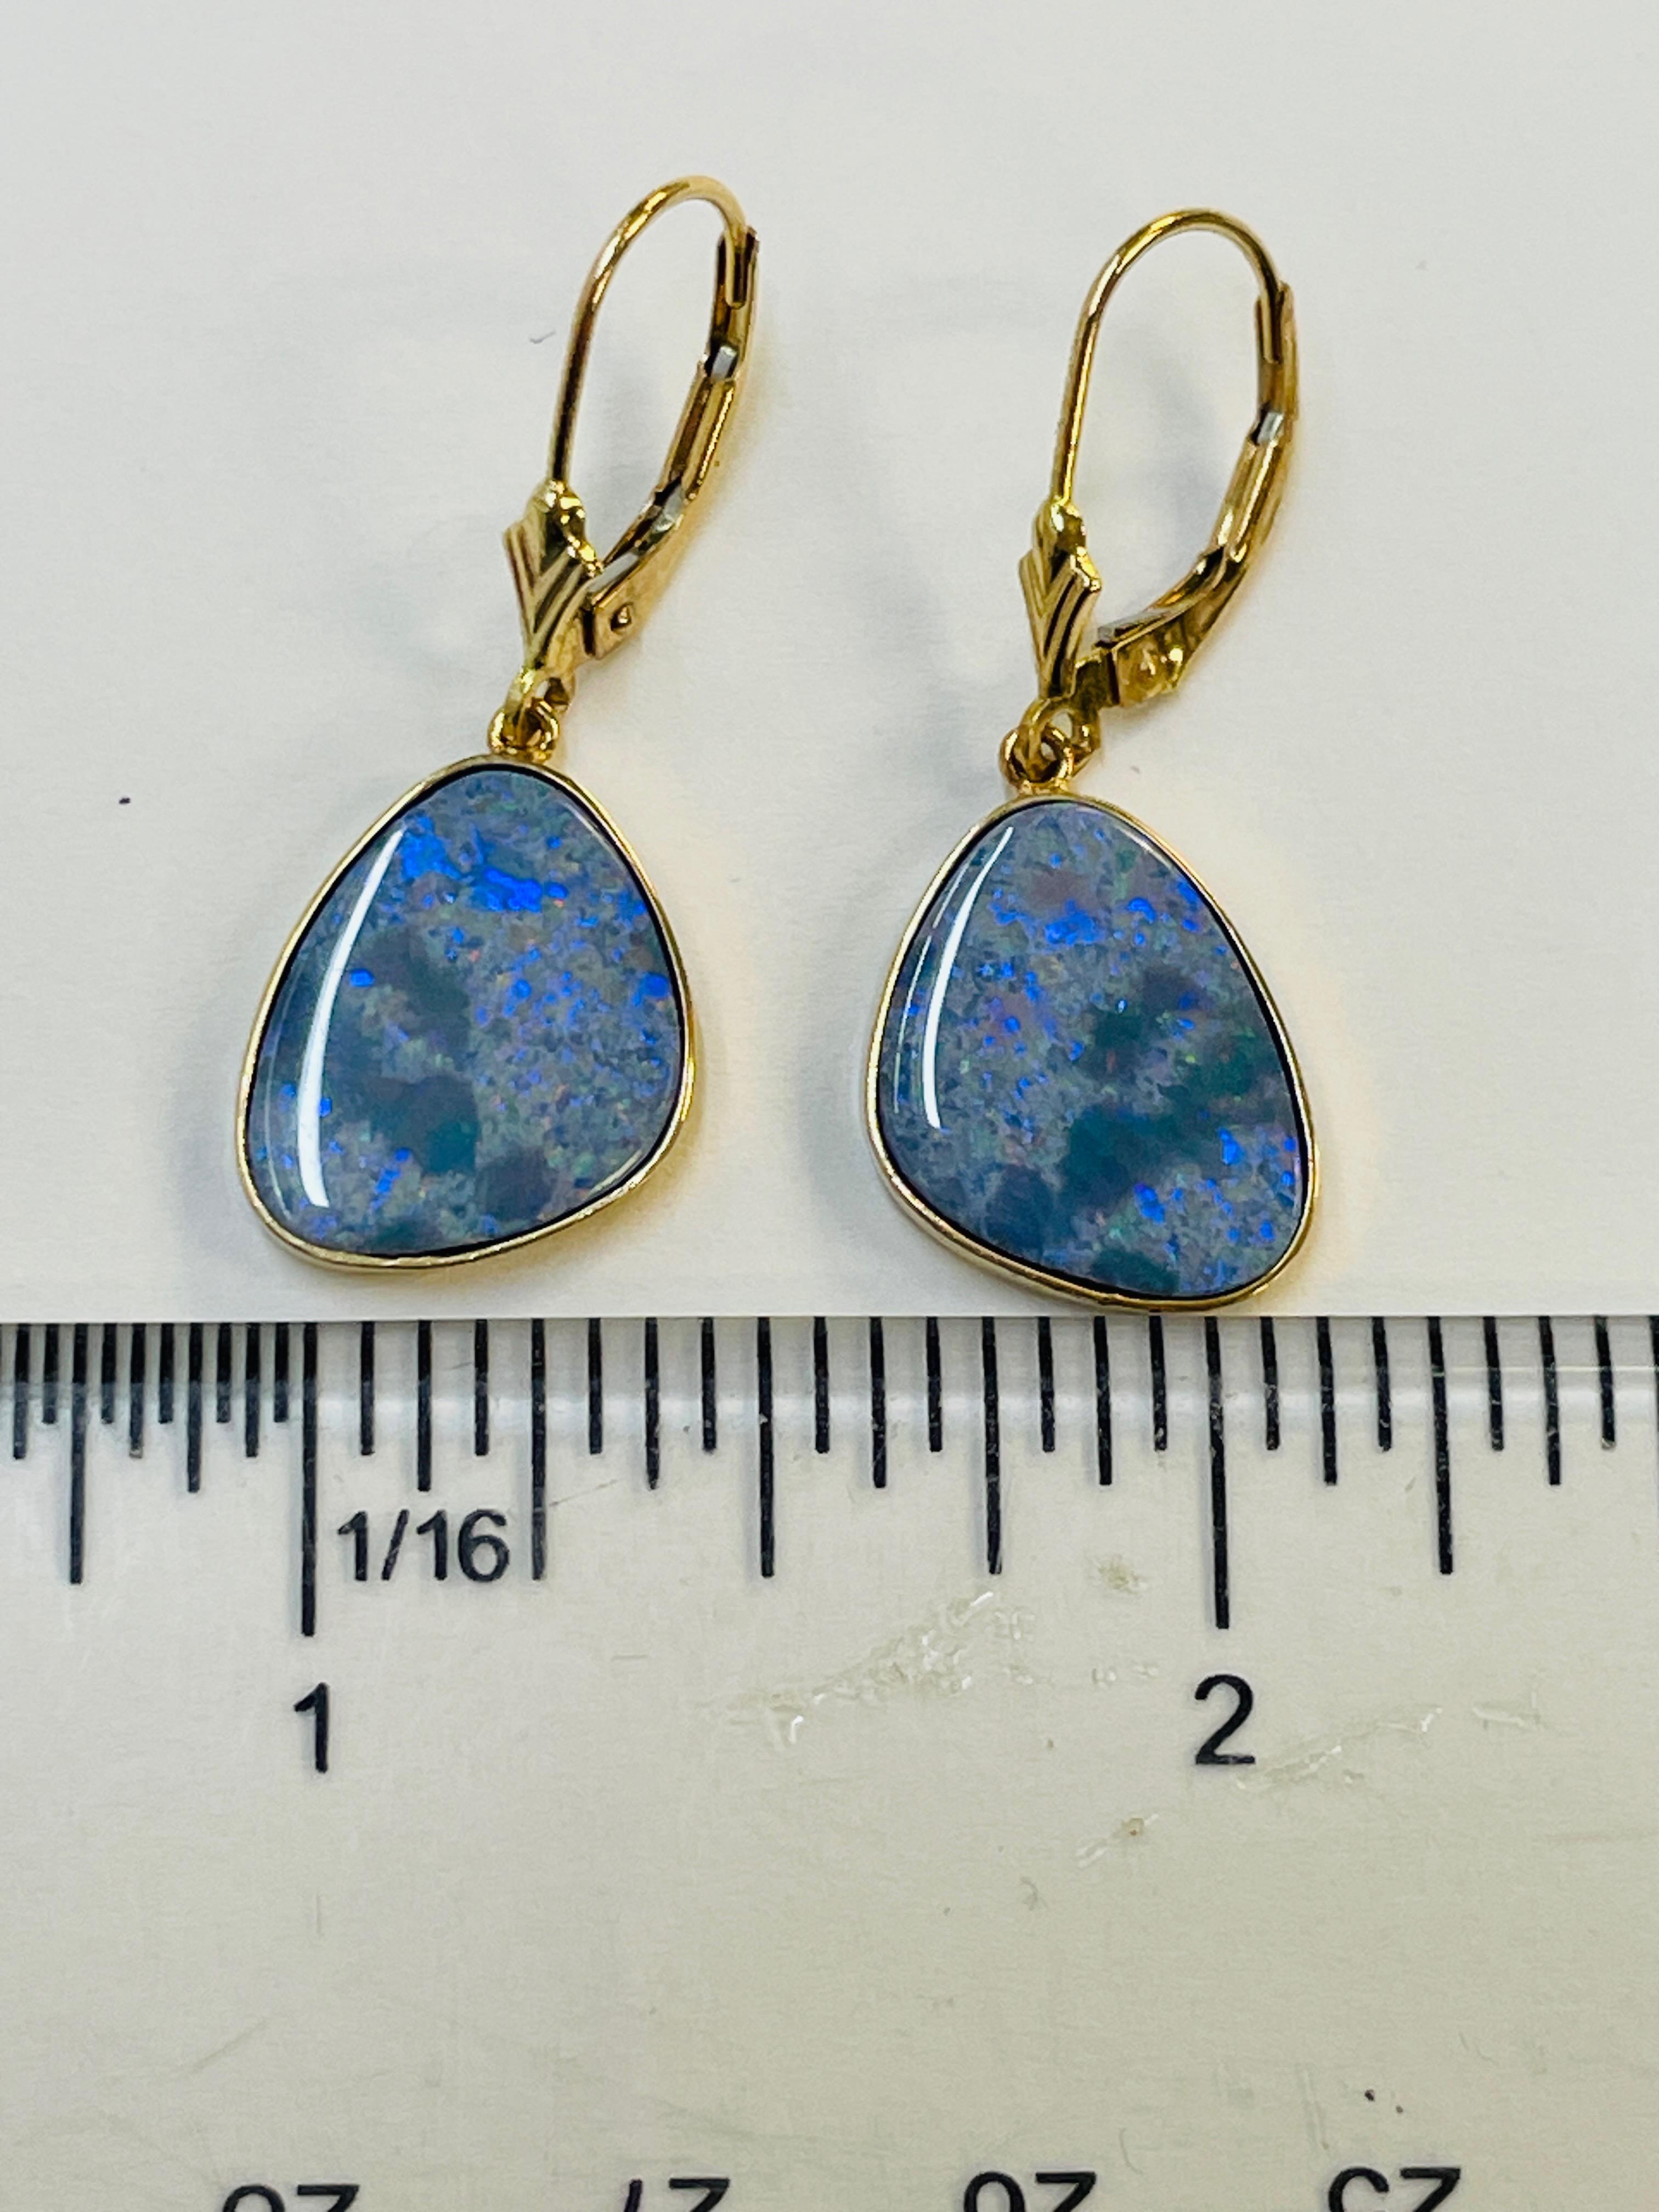 PAIR OF 14KT YELLOW GOLD OPAL EARRINGS WITH APPRAISAL